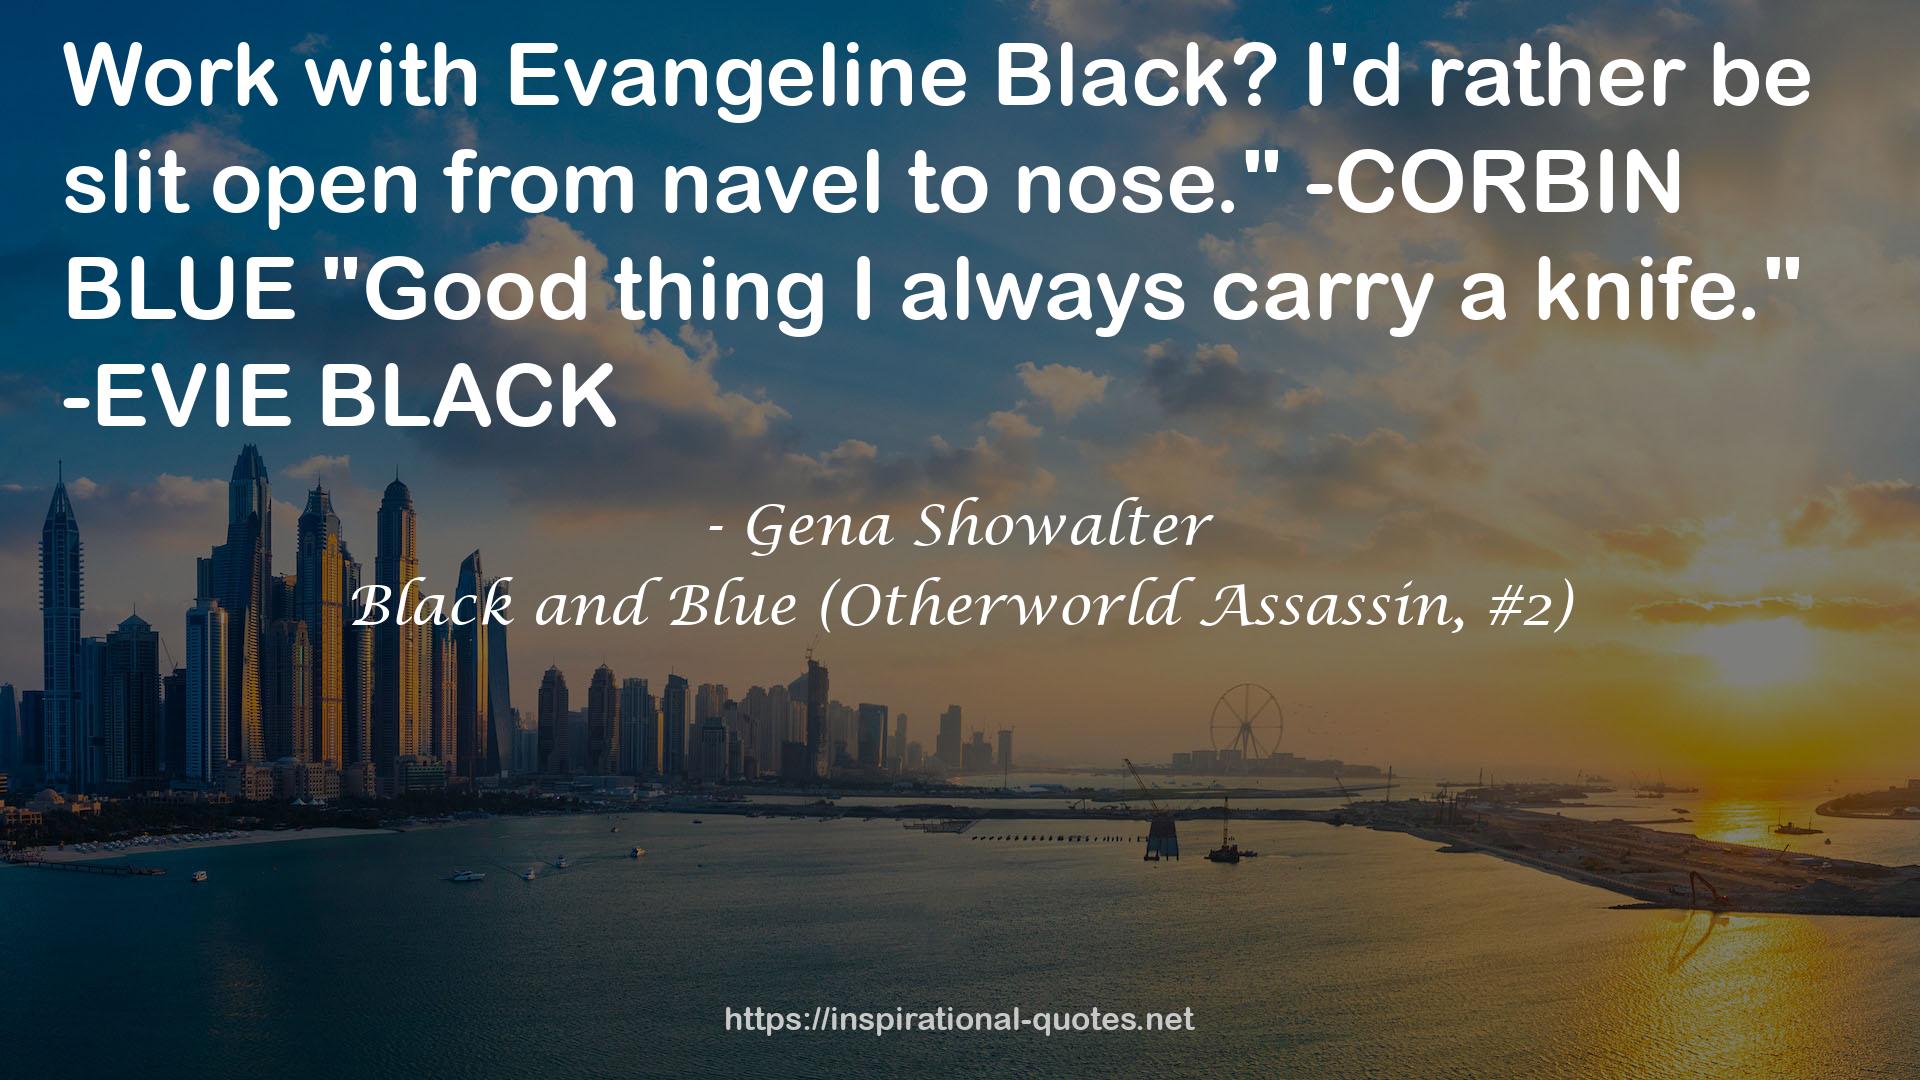 Black and Blue (Otherworld Assassin, #2) QUOTES